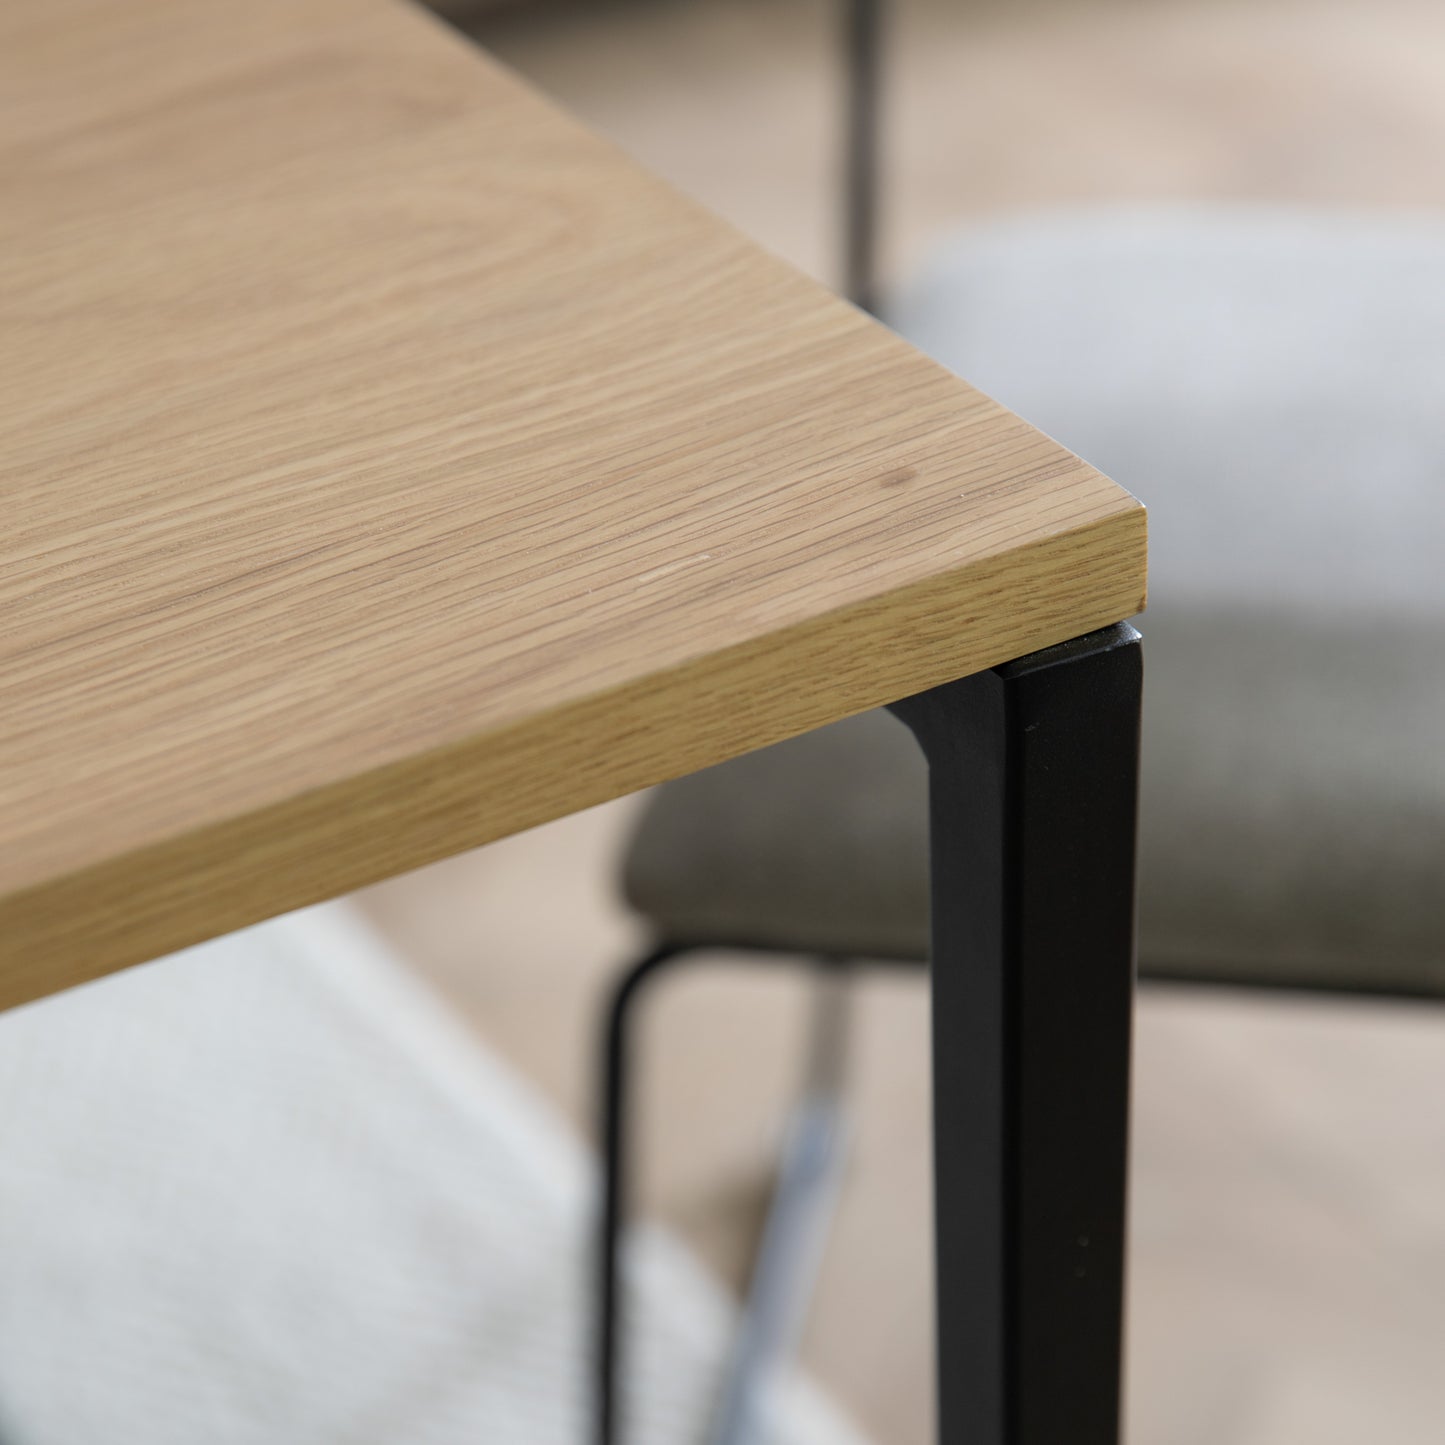 A close-up of the Staverton Dining Table by Kikiathome.co.uk showcasing its metal frame for interior decor.